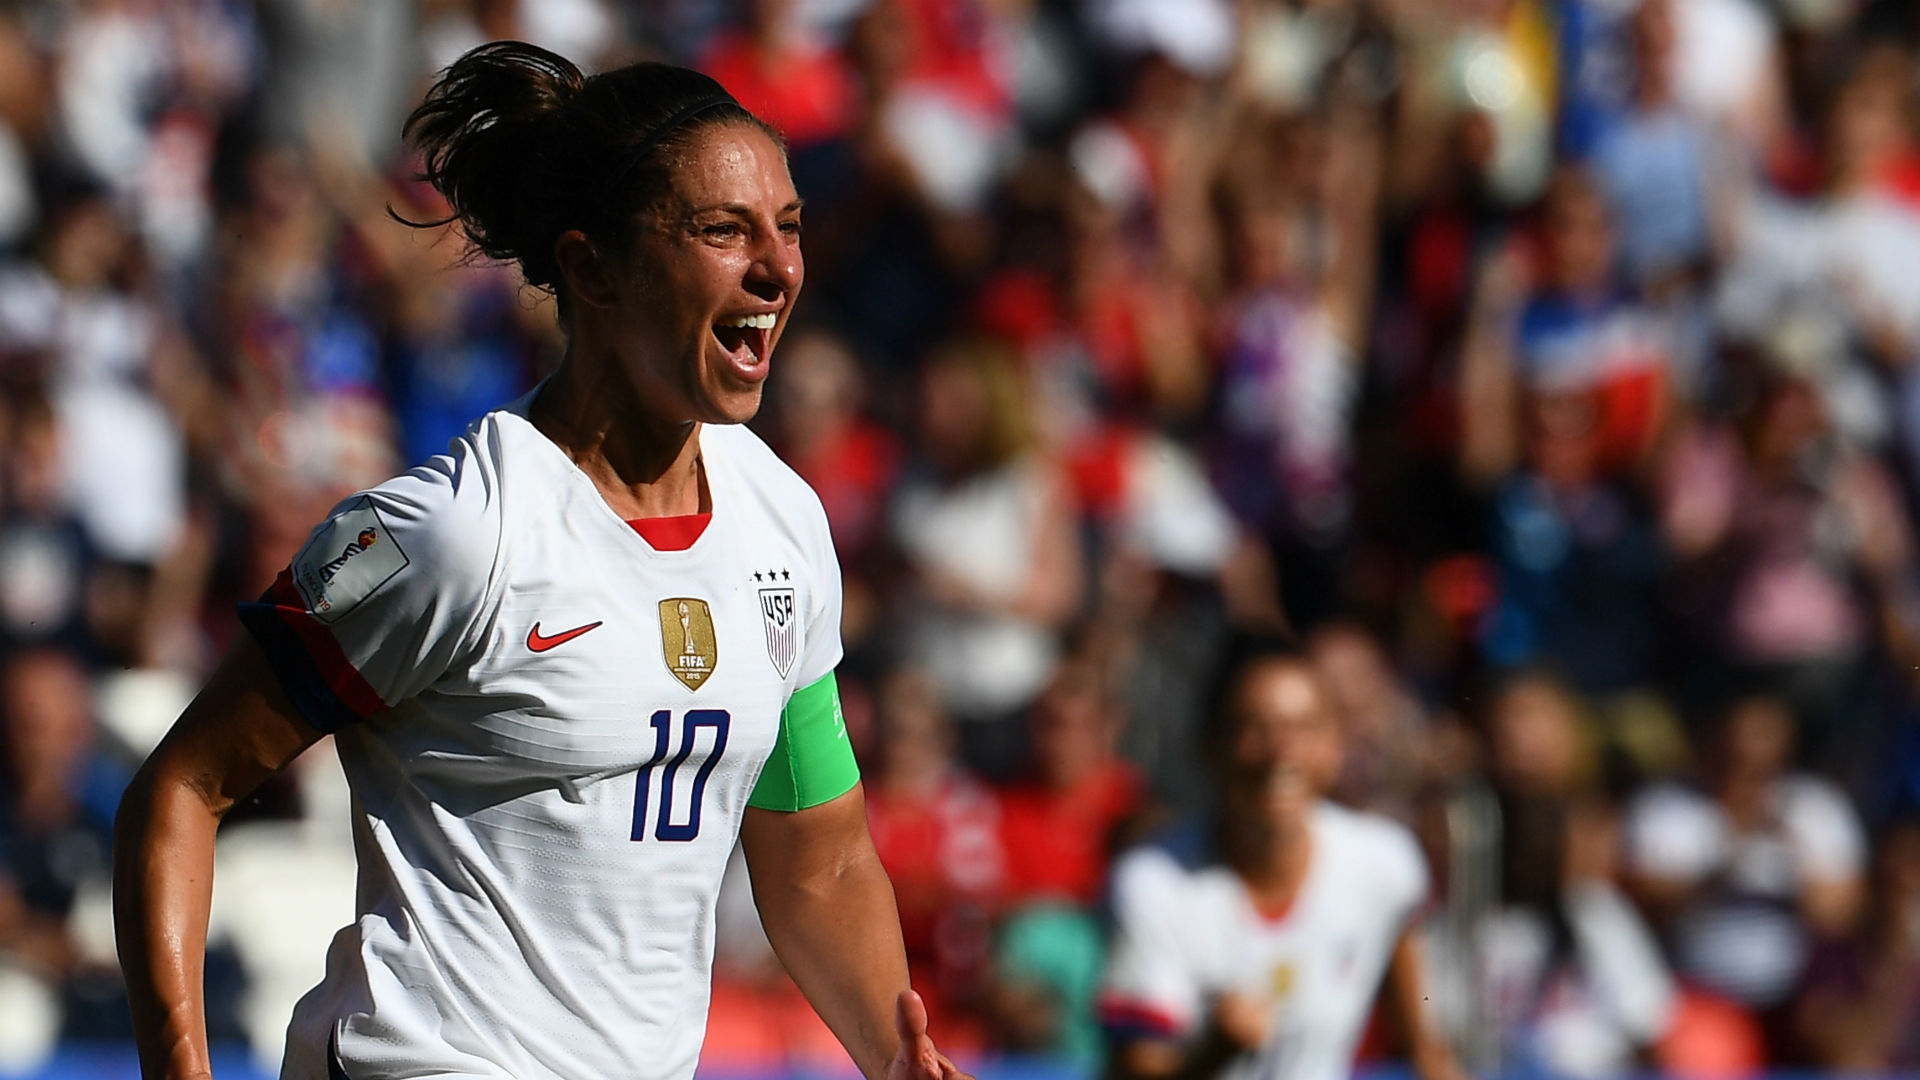 Carli Lloyd received offer to kick in NFL preseason game, trainer says